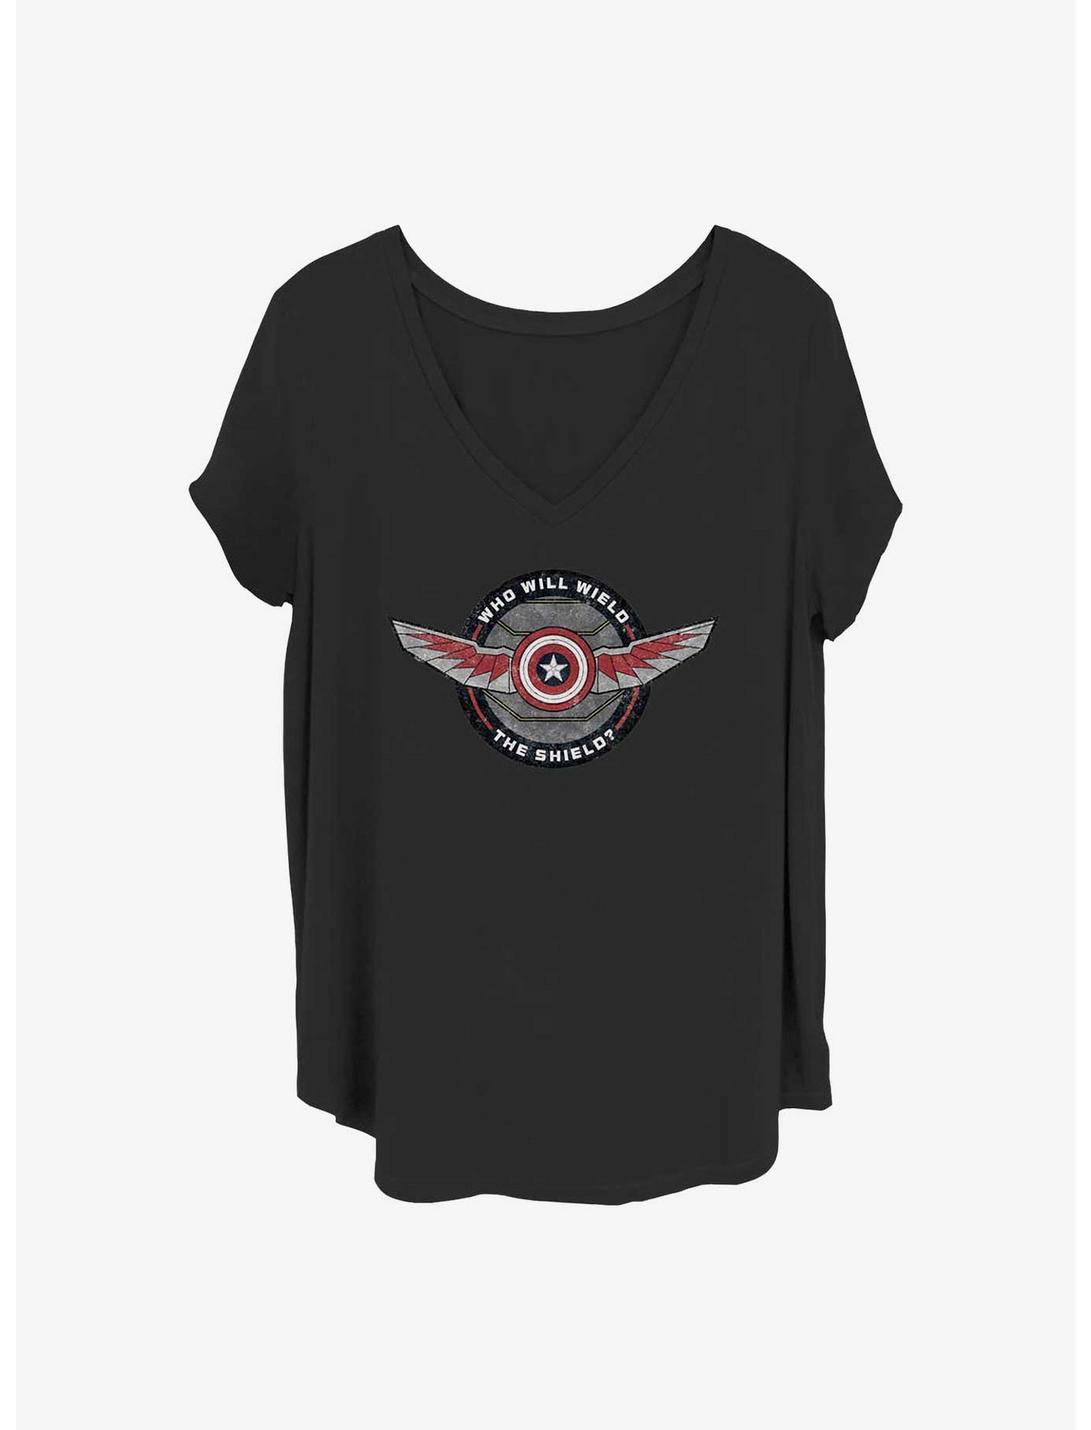 Marvel The Falcon and the Winter Soldier Wield Shield Girls T-Shirt Plus Size, BLACK, hi-res